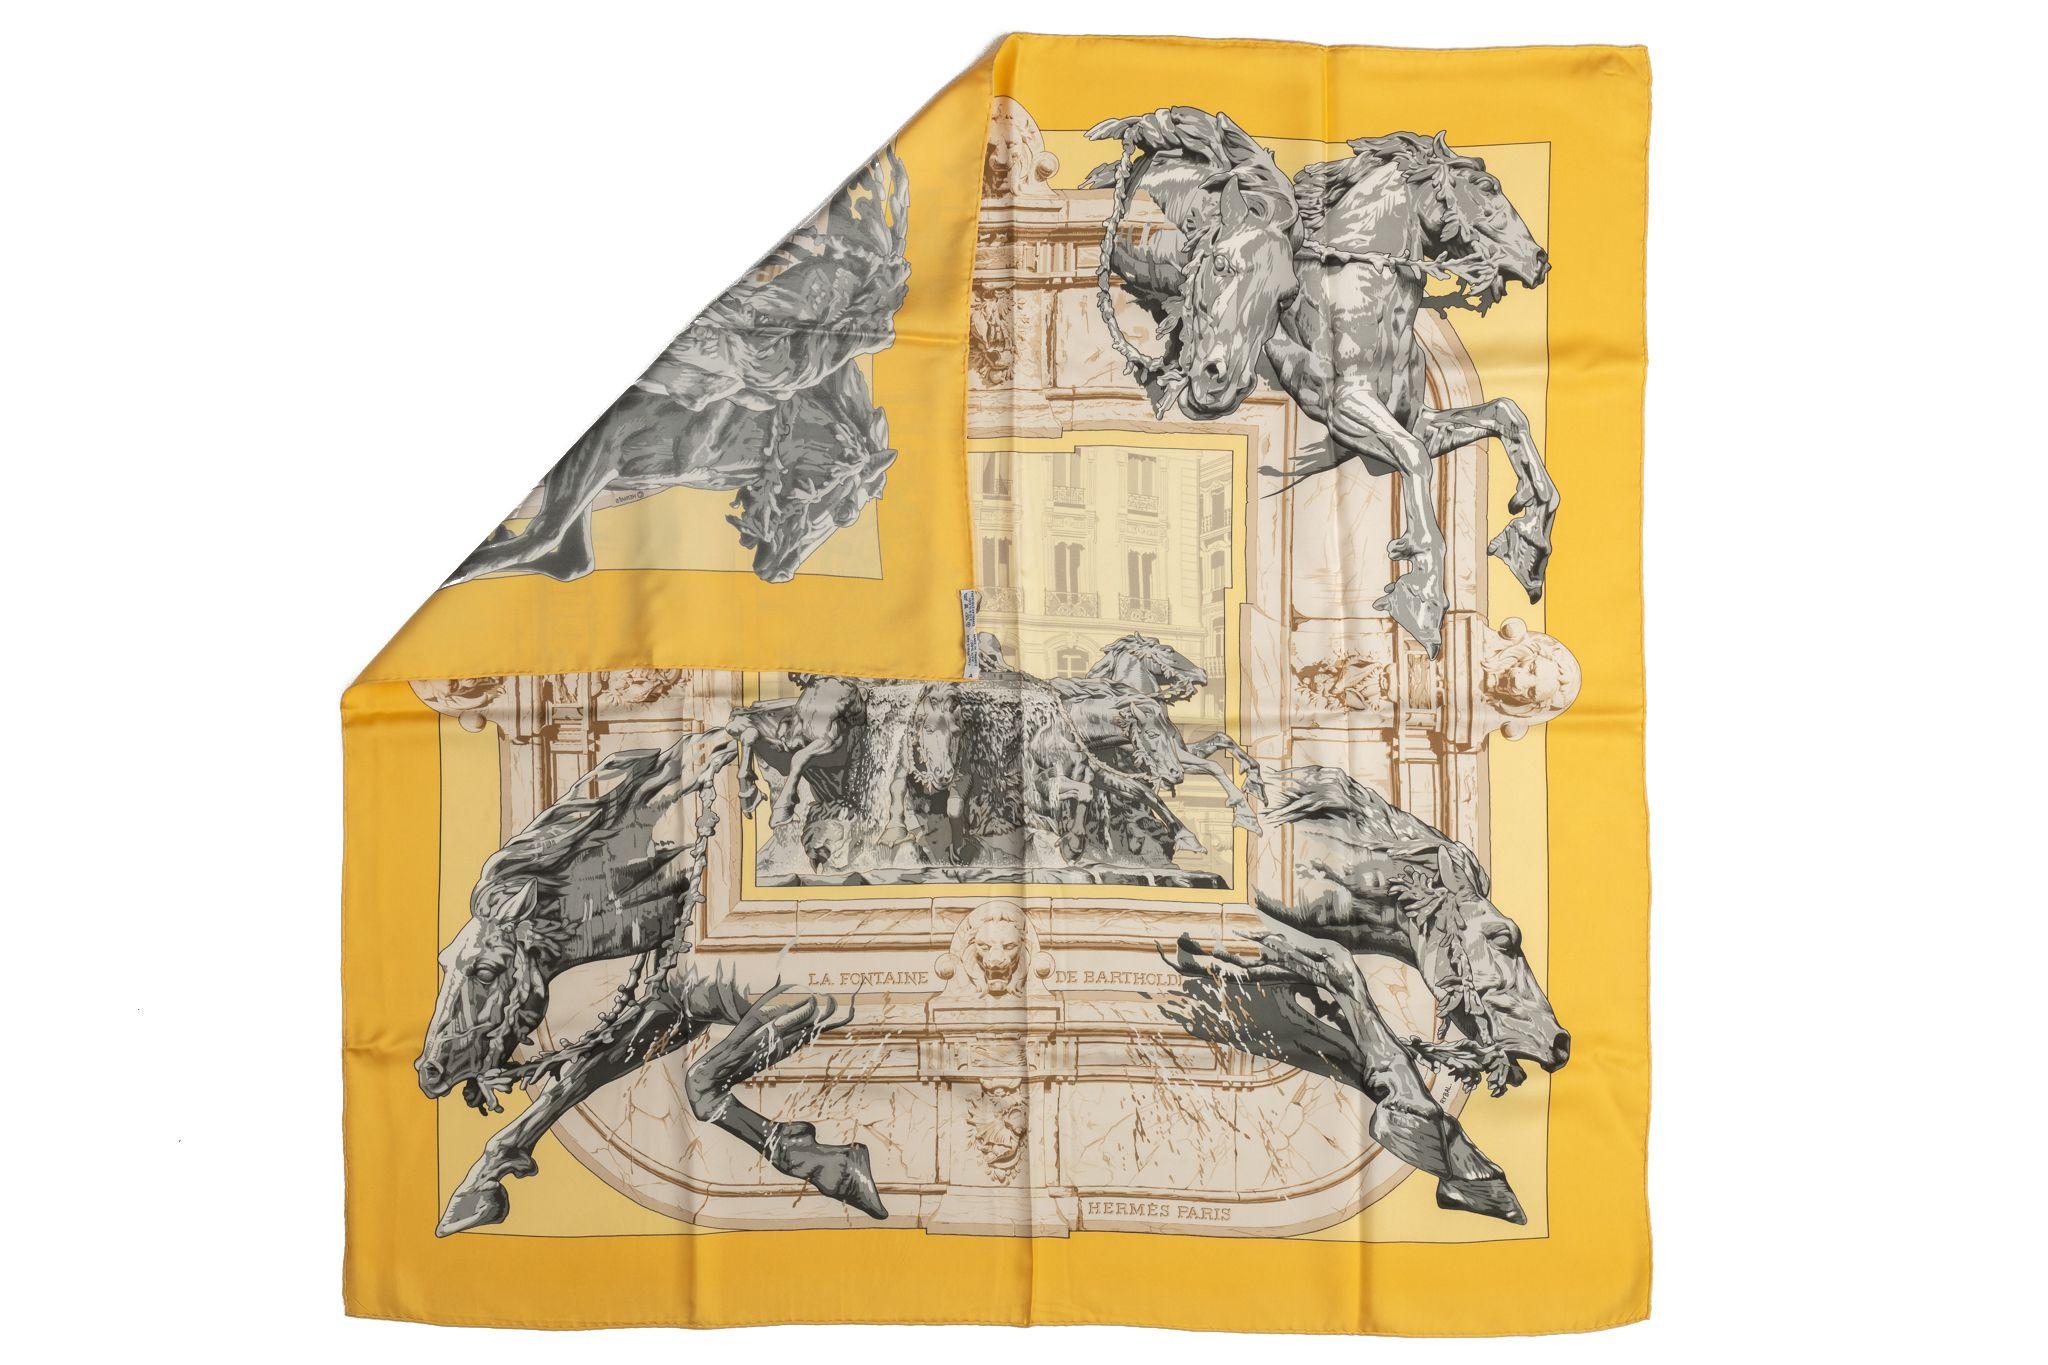 Hermès La Fontaine de Bartholdi gold silk scarf with silver and grey details. Hand-rolled edges. Original box included.